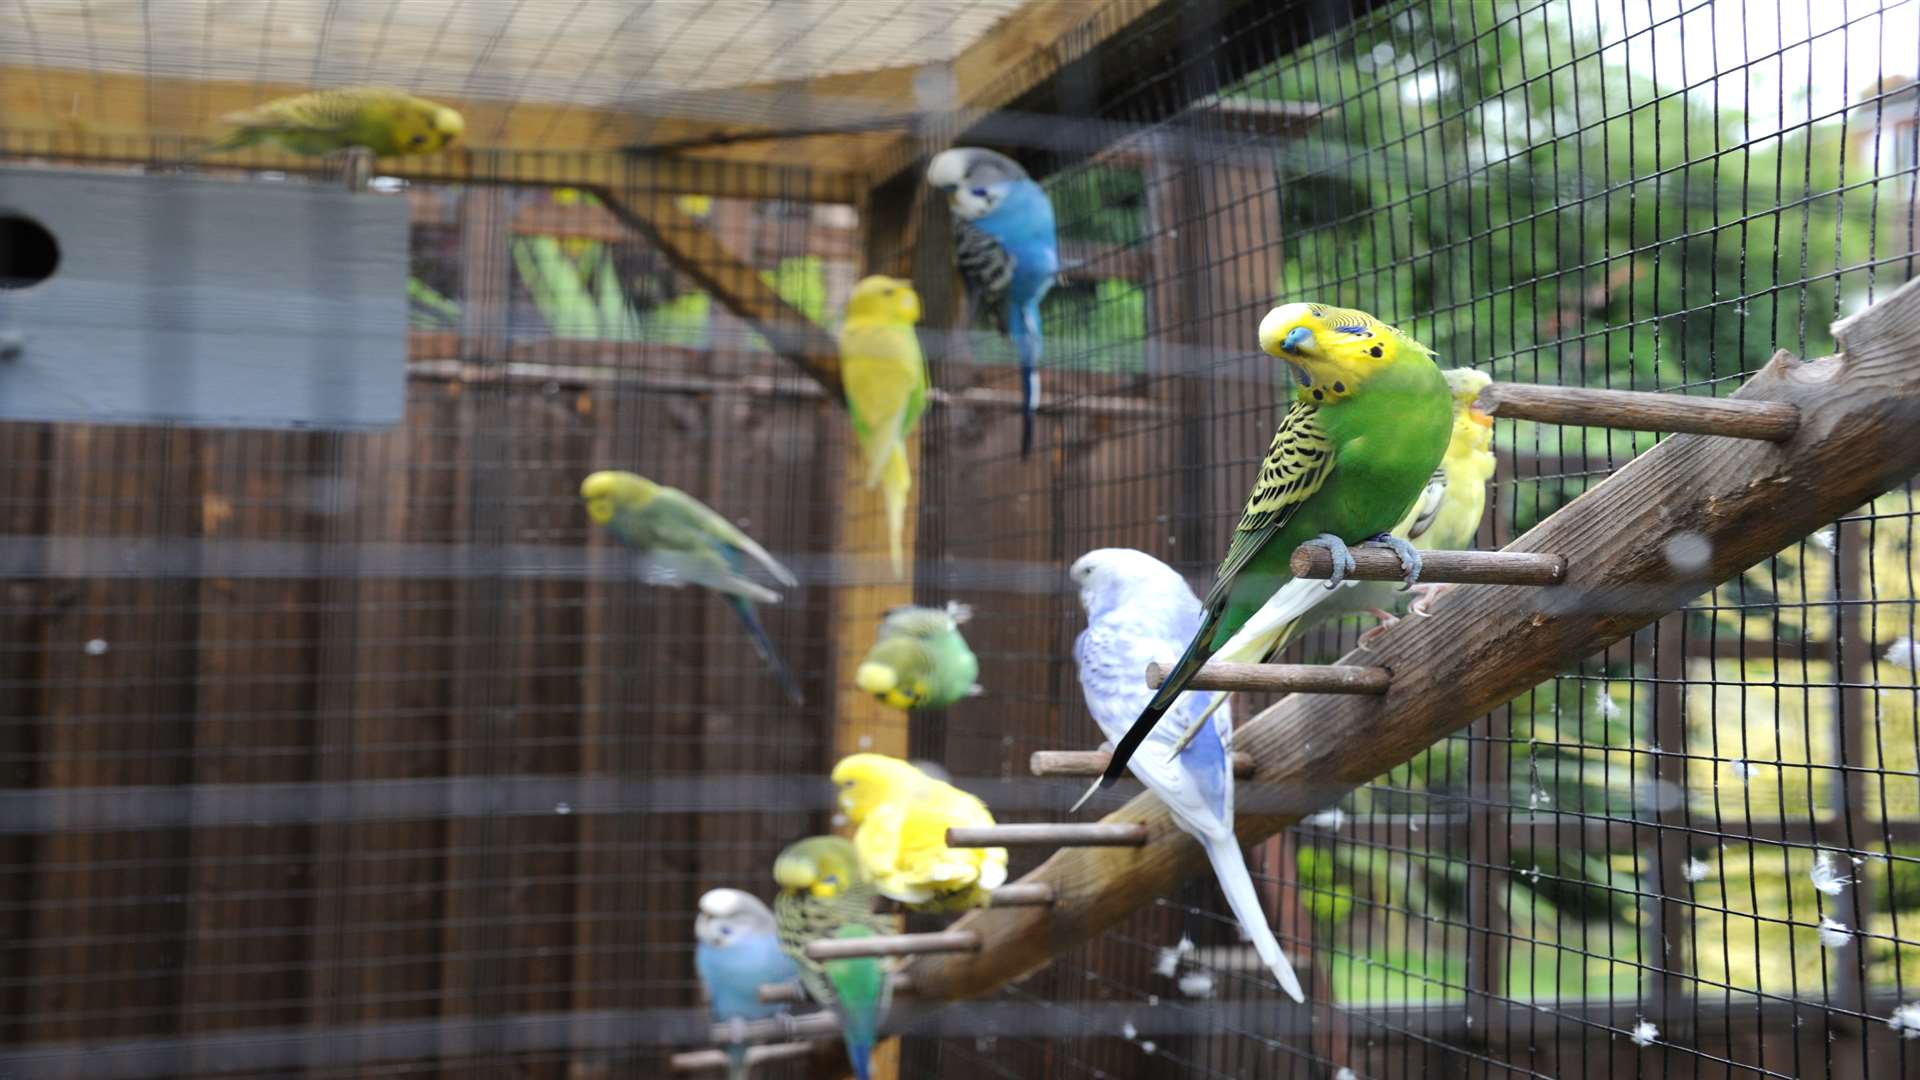 The birds were Julia's pride and joy and lived in an aviary at the back of garden.